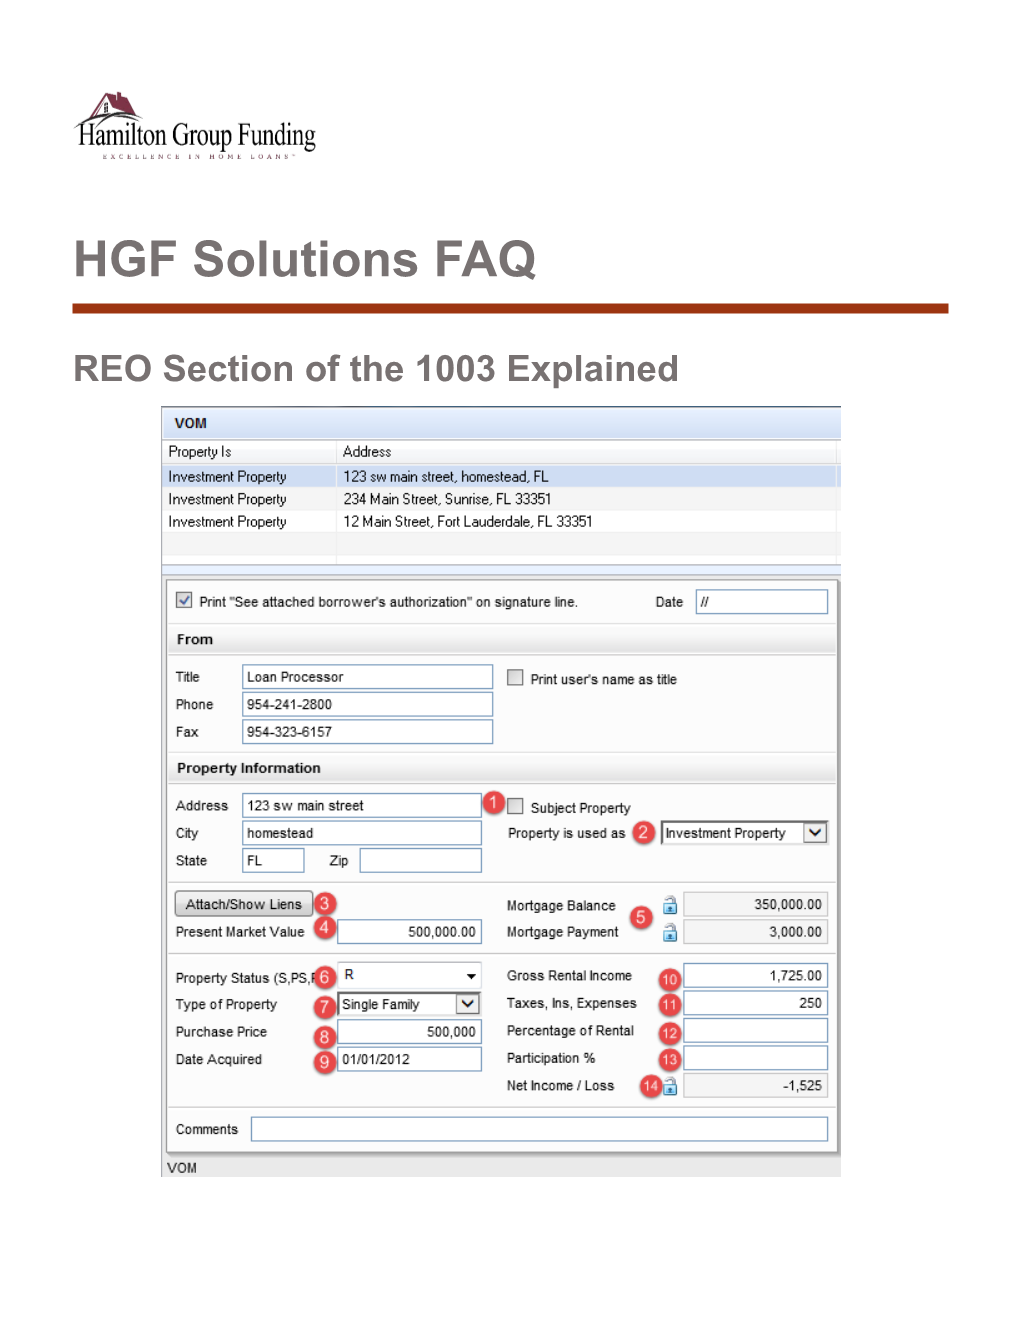 REO Section of the 1003 Explained